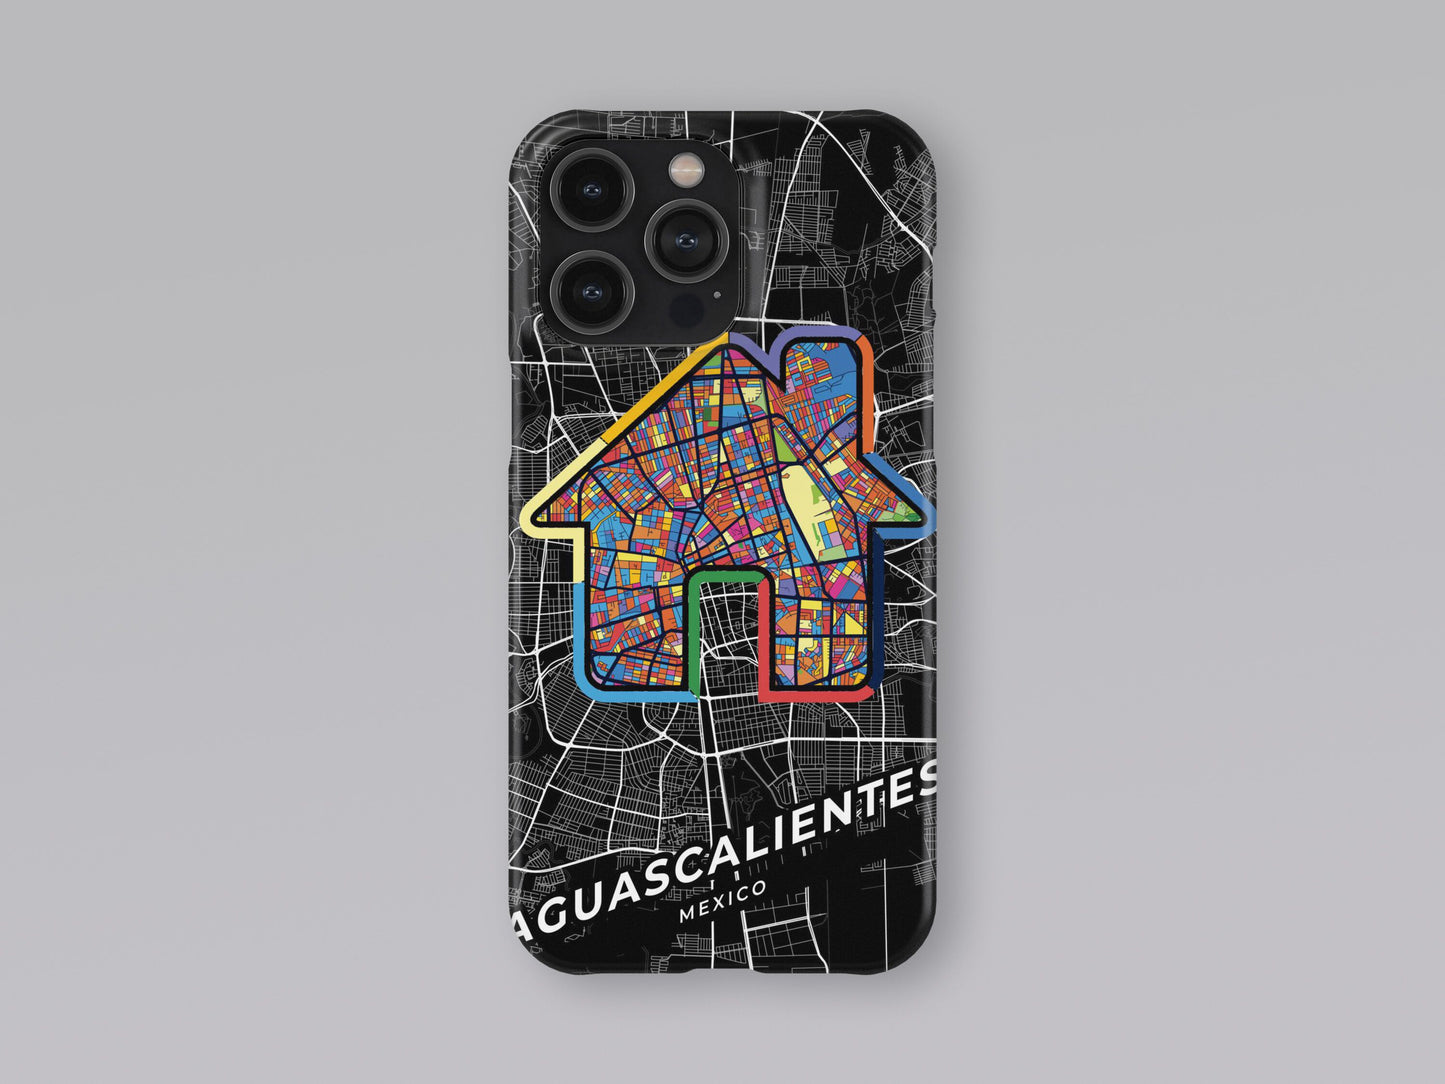 Aguascalientes Mexico slim phone case with colorful icon. Birthday, wedding or housewarming gift. Couple match cases. 3